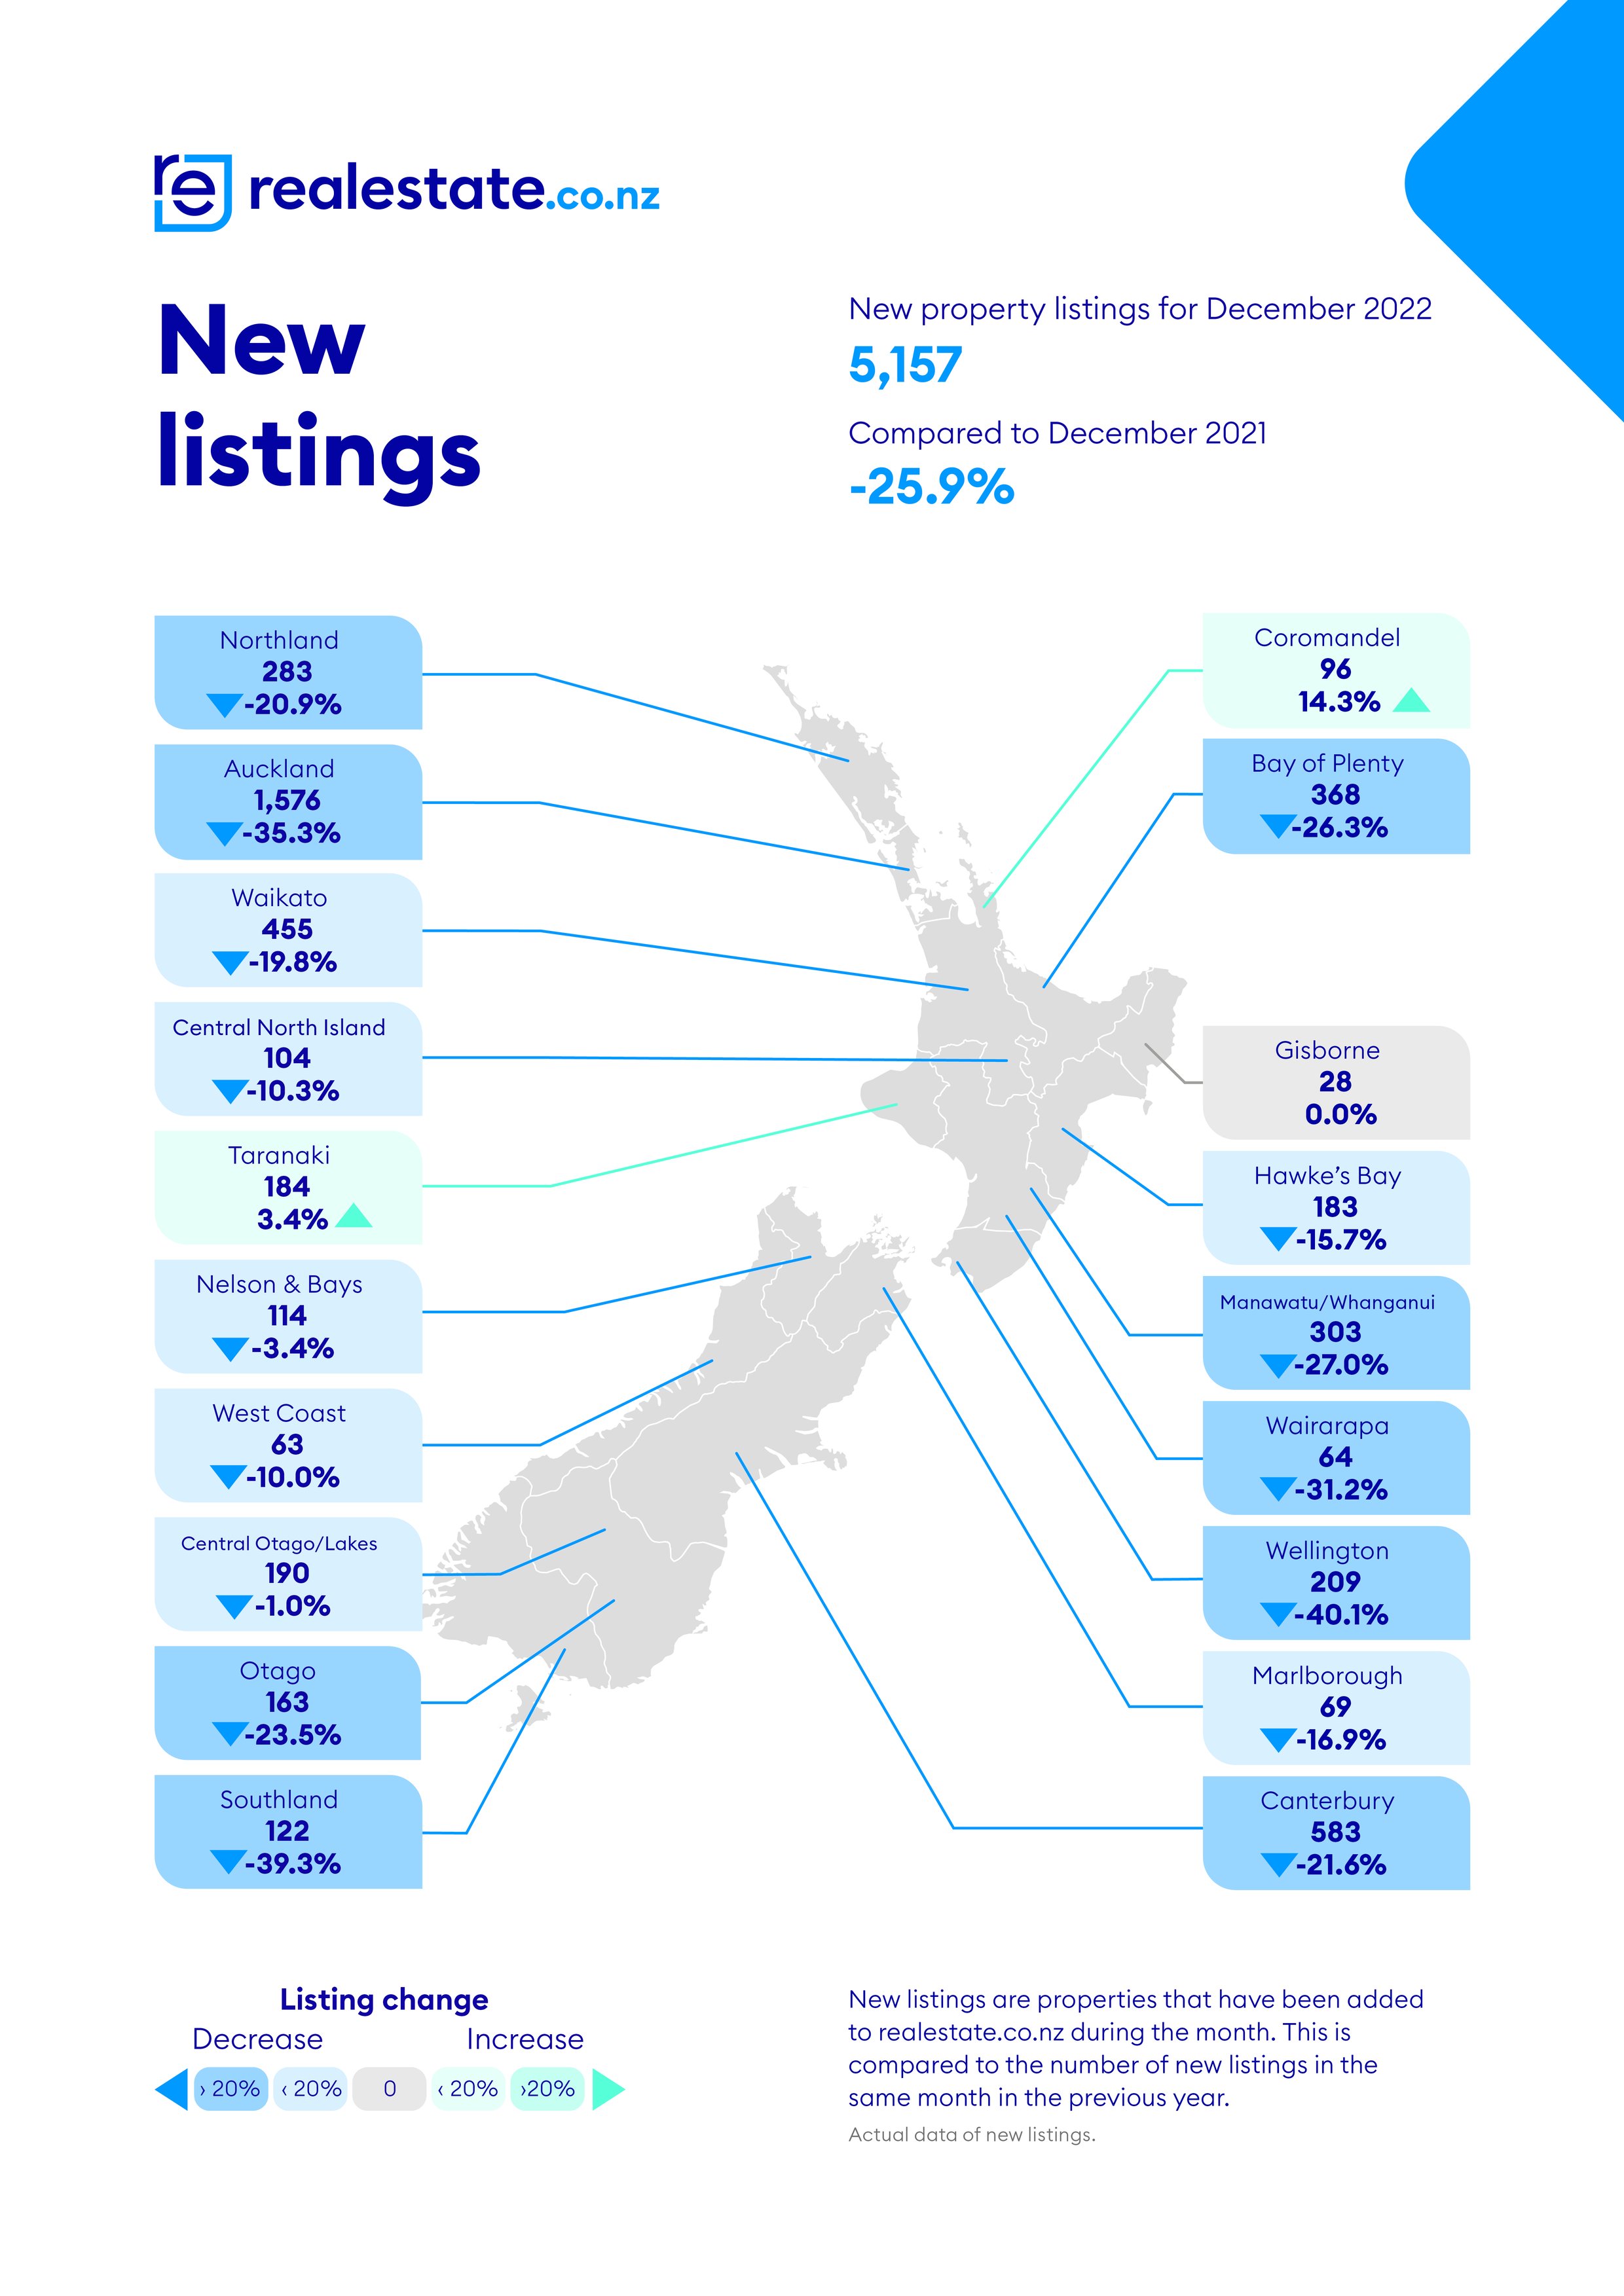 realestate.co.nz New Listings December 2022